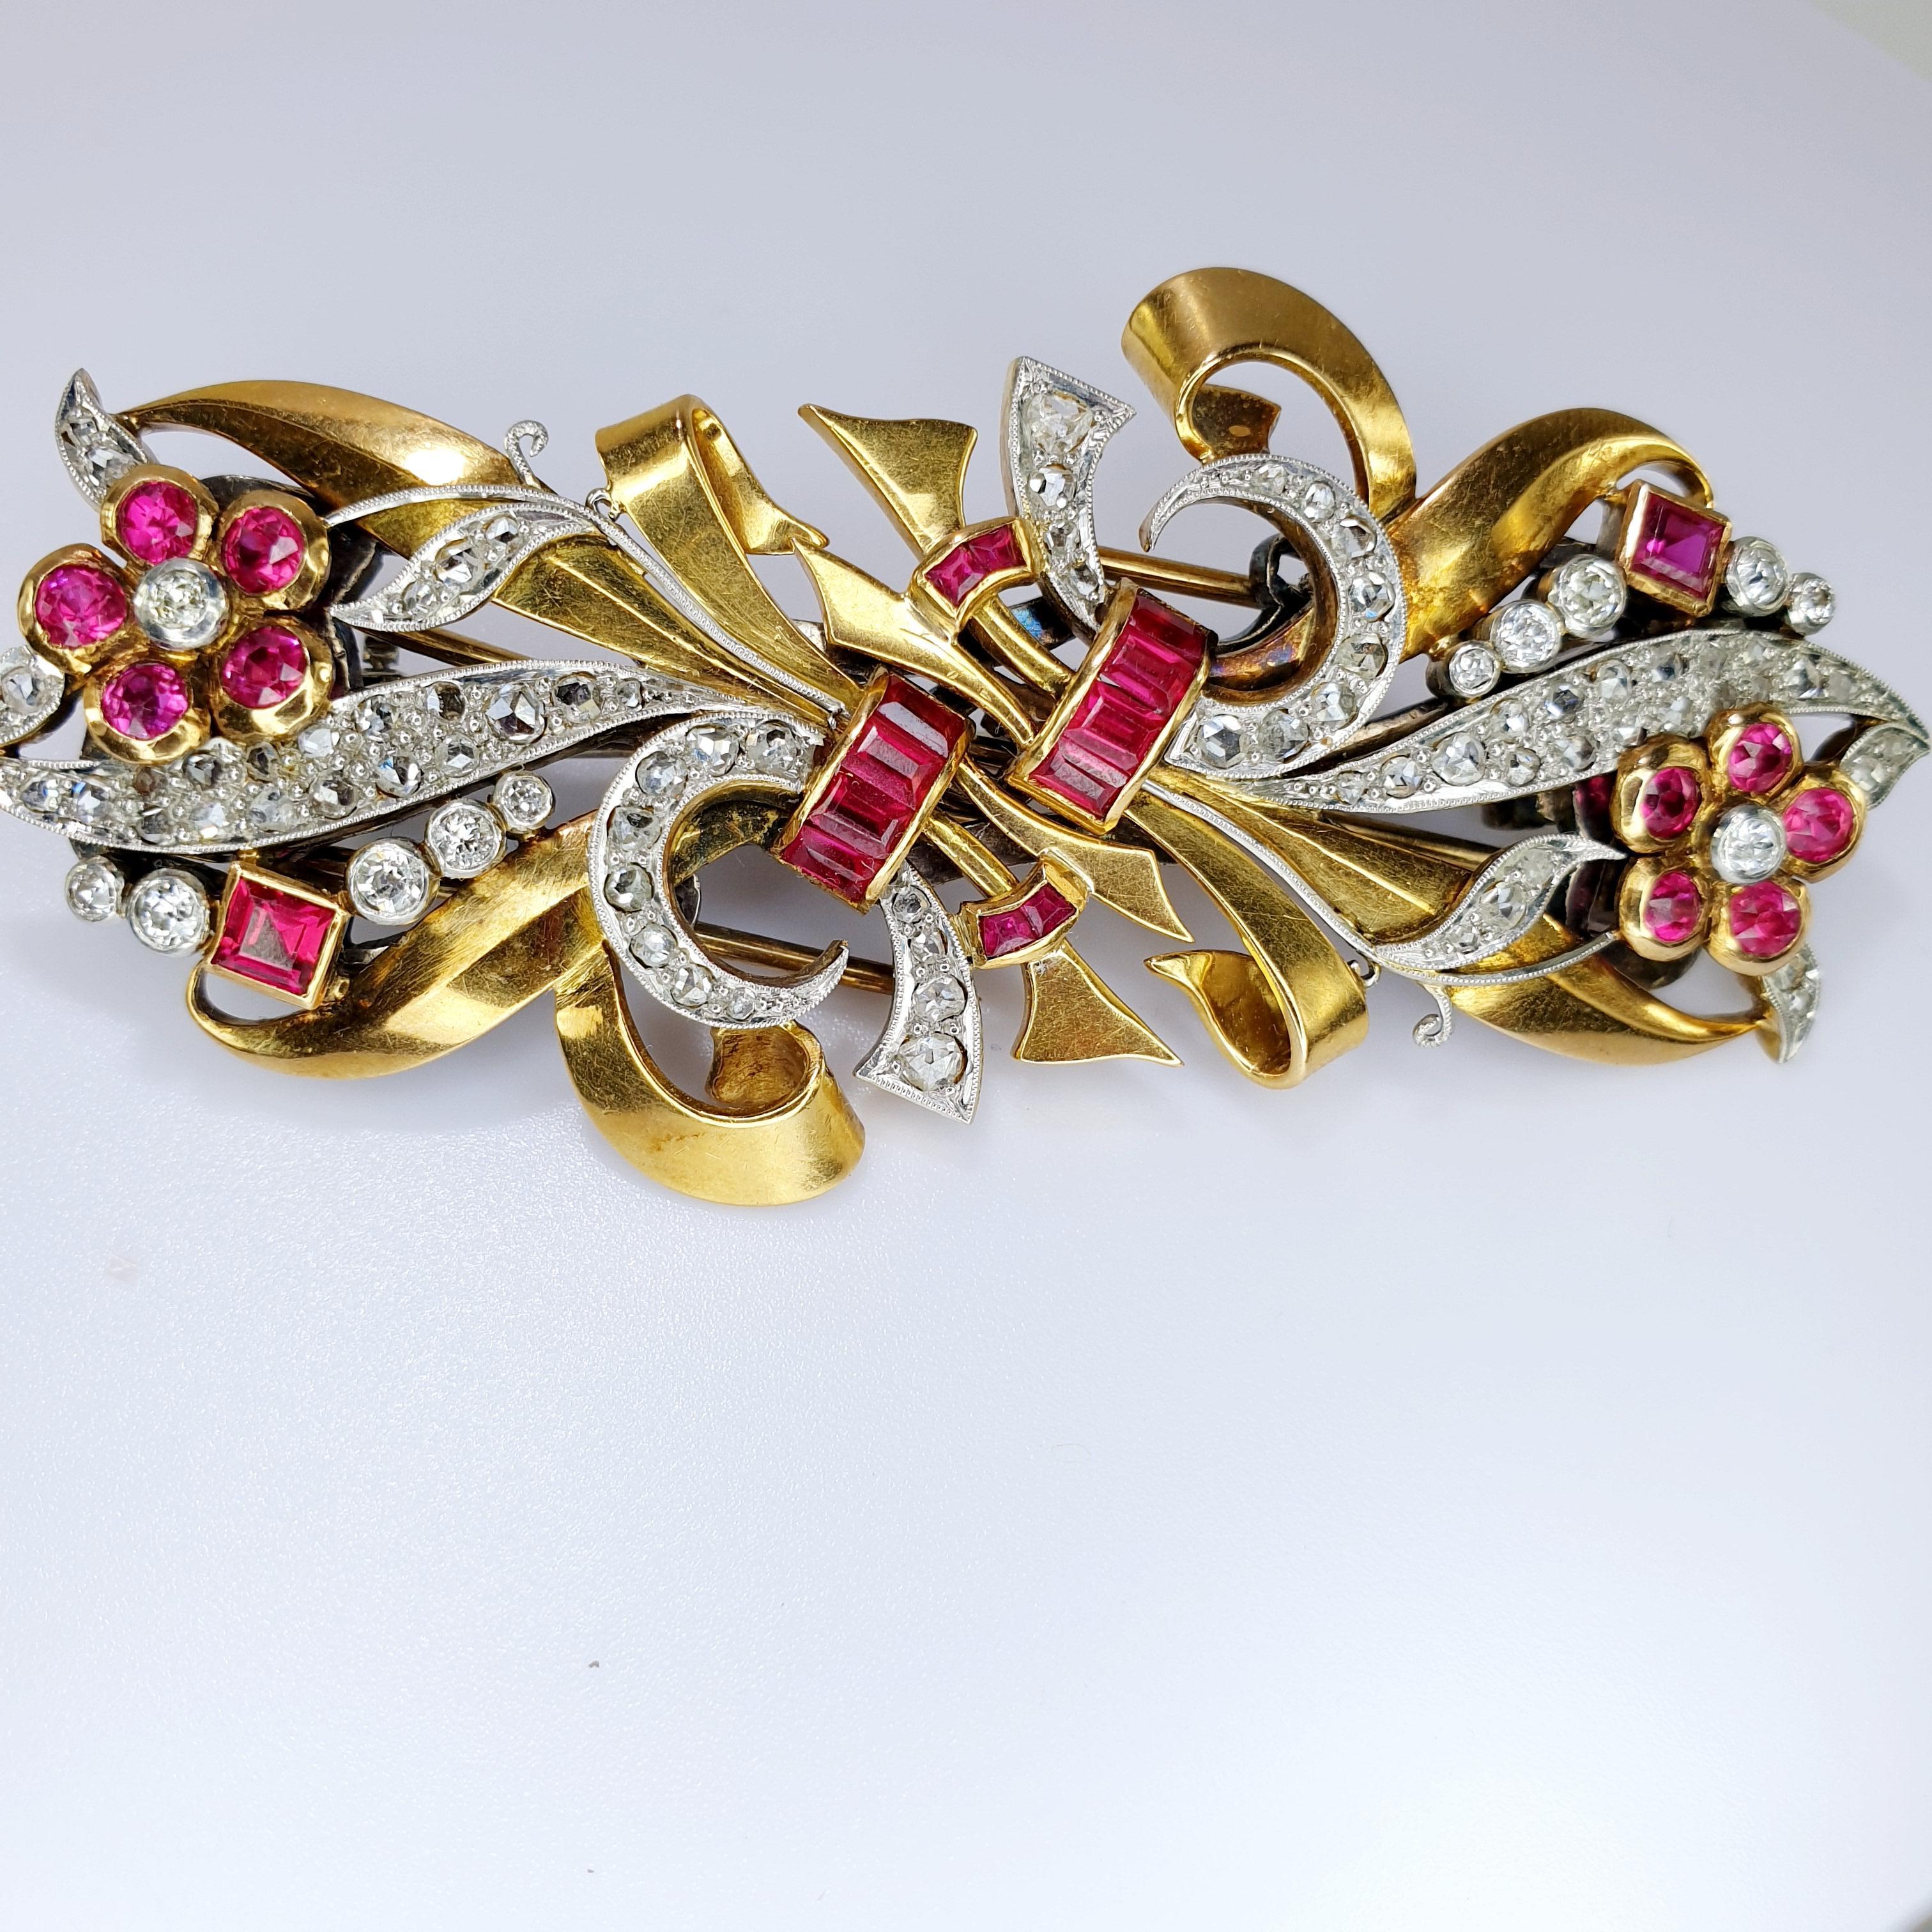 This beautiful Chevalier epoque  1940's clips can be worn separately or together by its custom fitting. 
The diamond and gold ribbon swirl iand nests ruby colored gems. The brooch is 18k rose gold  and fitting is 18k white gold. 
Can be used in